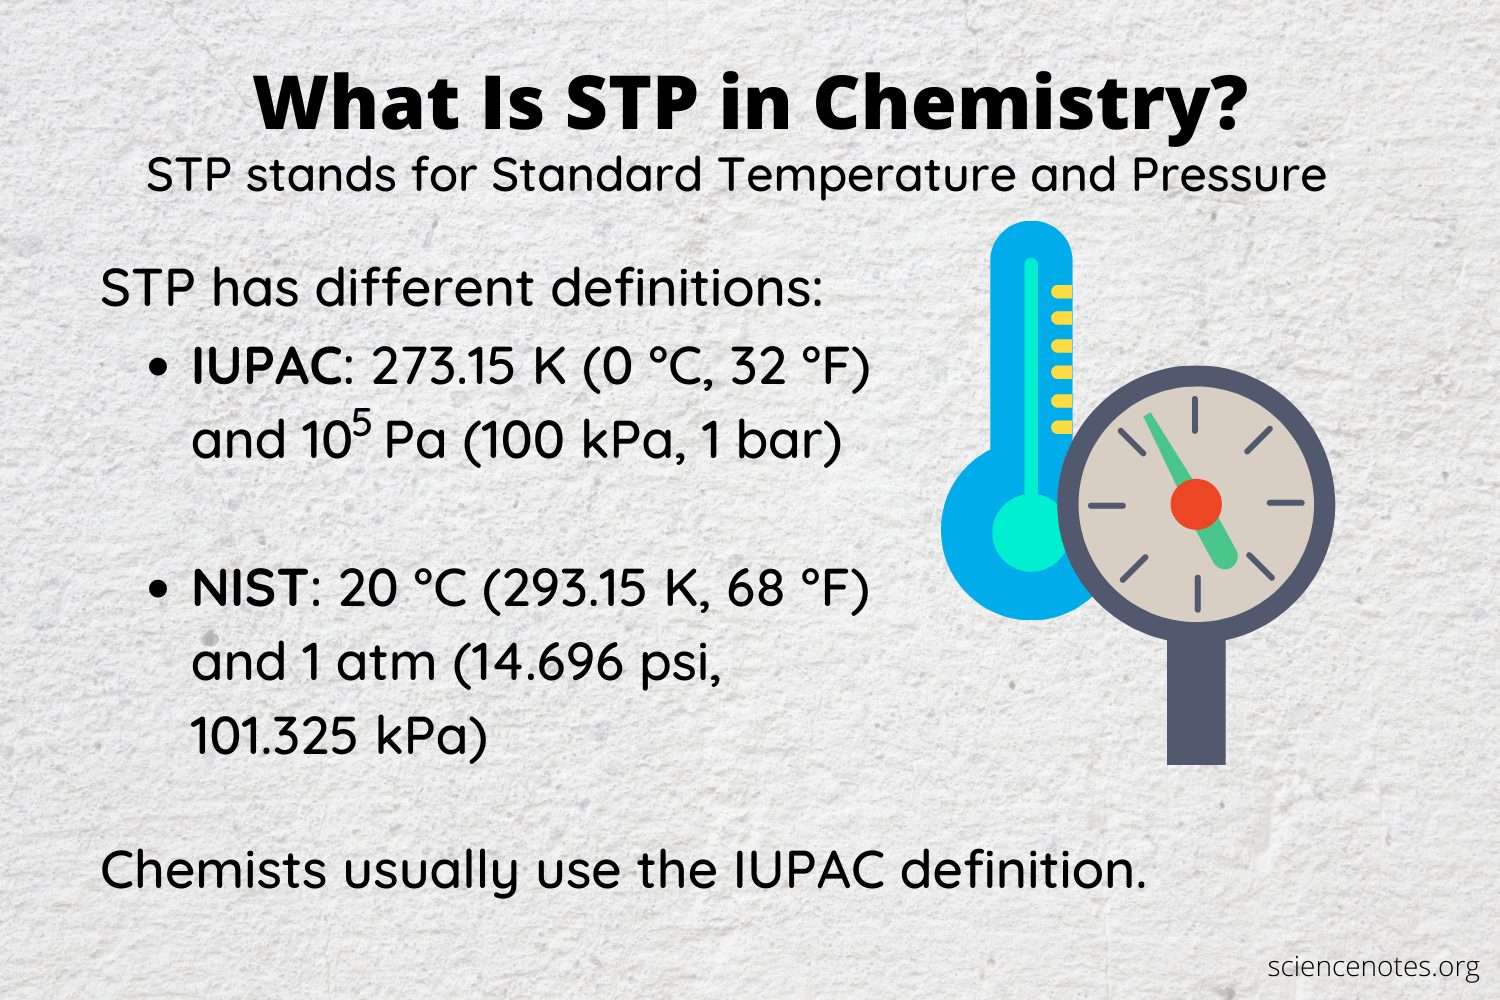 What Does STP Stand For?